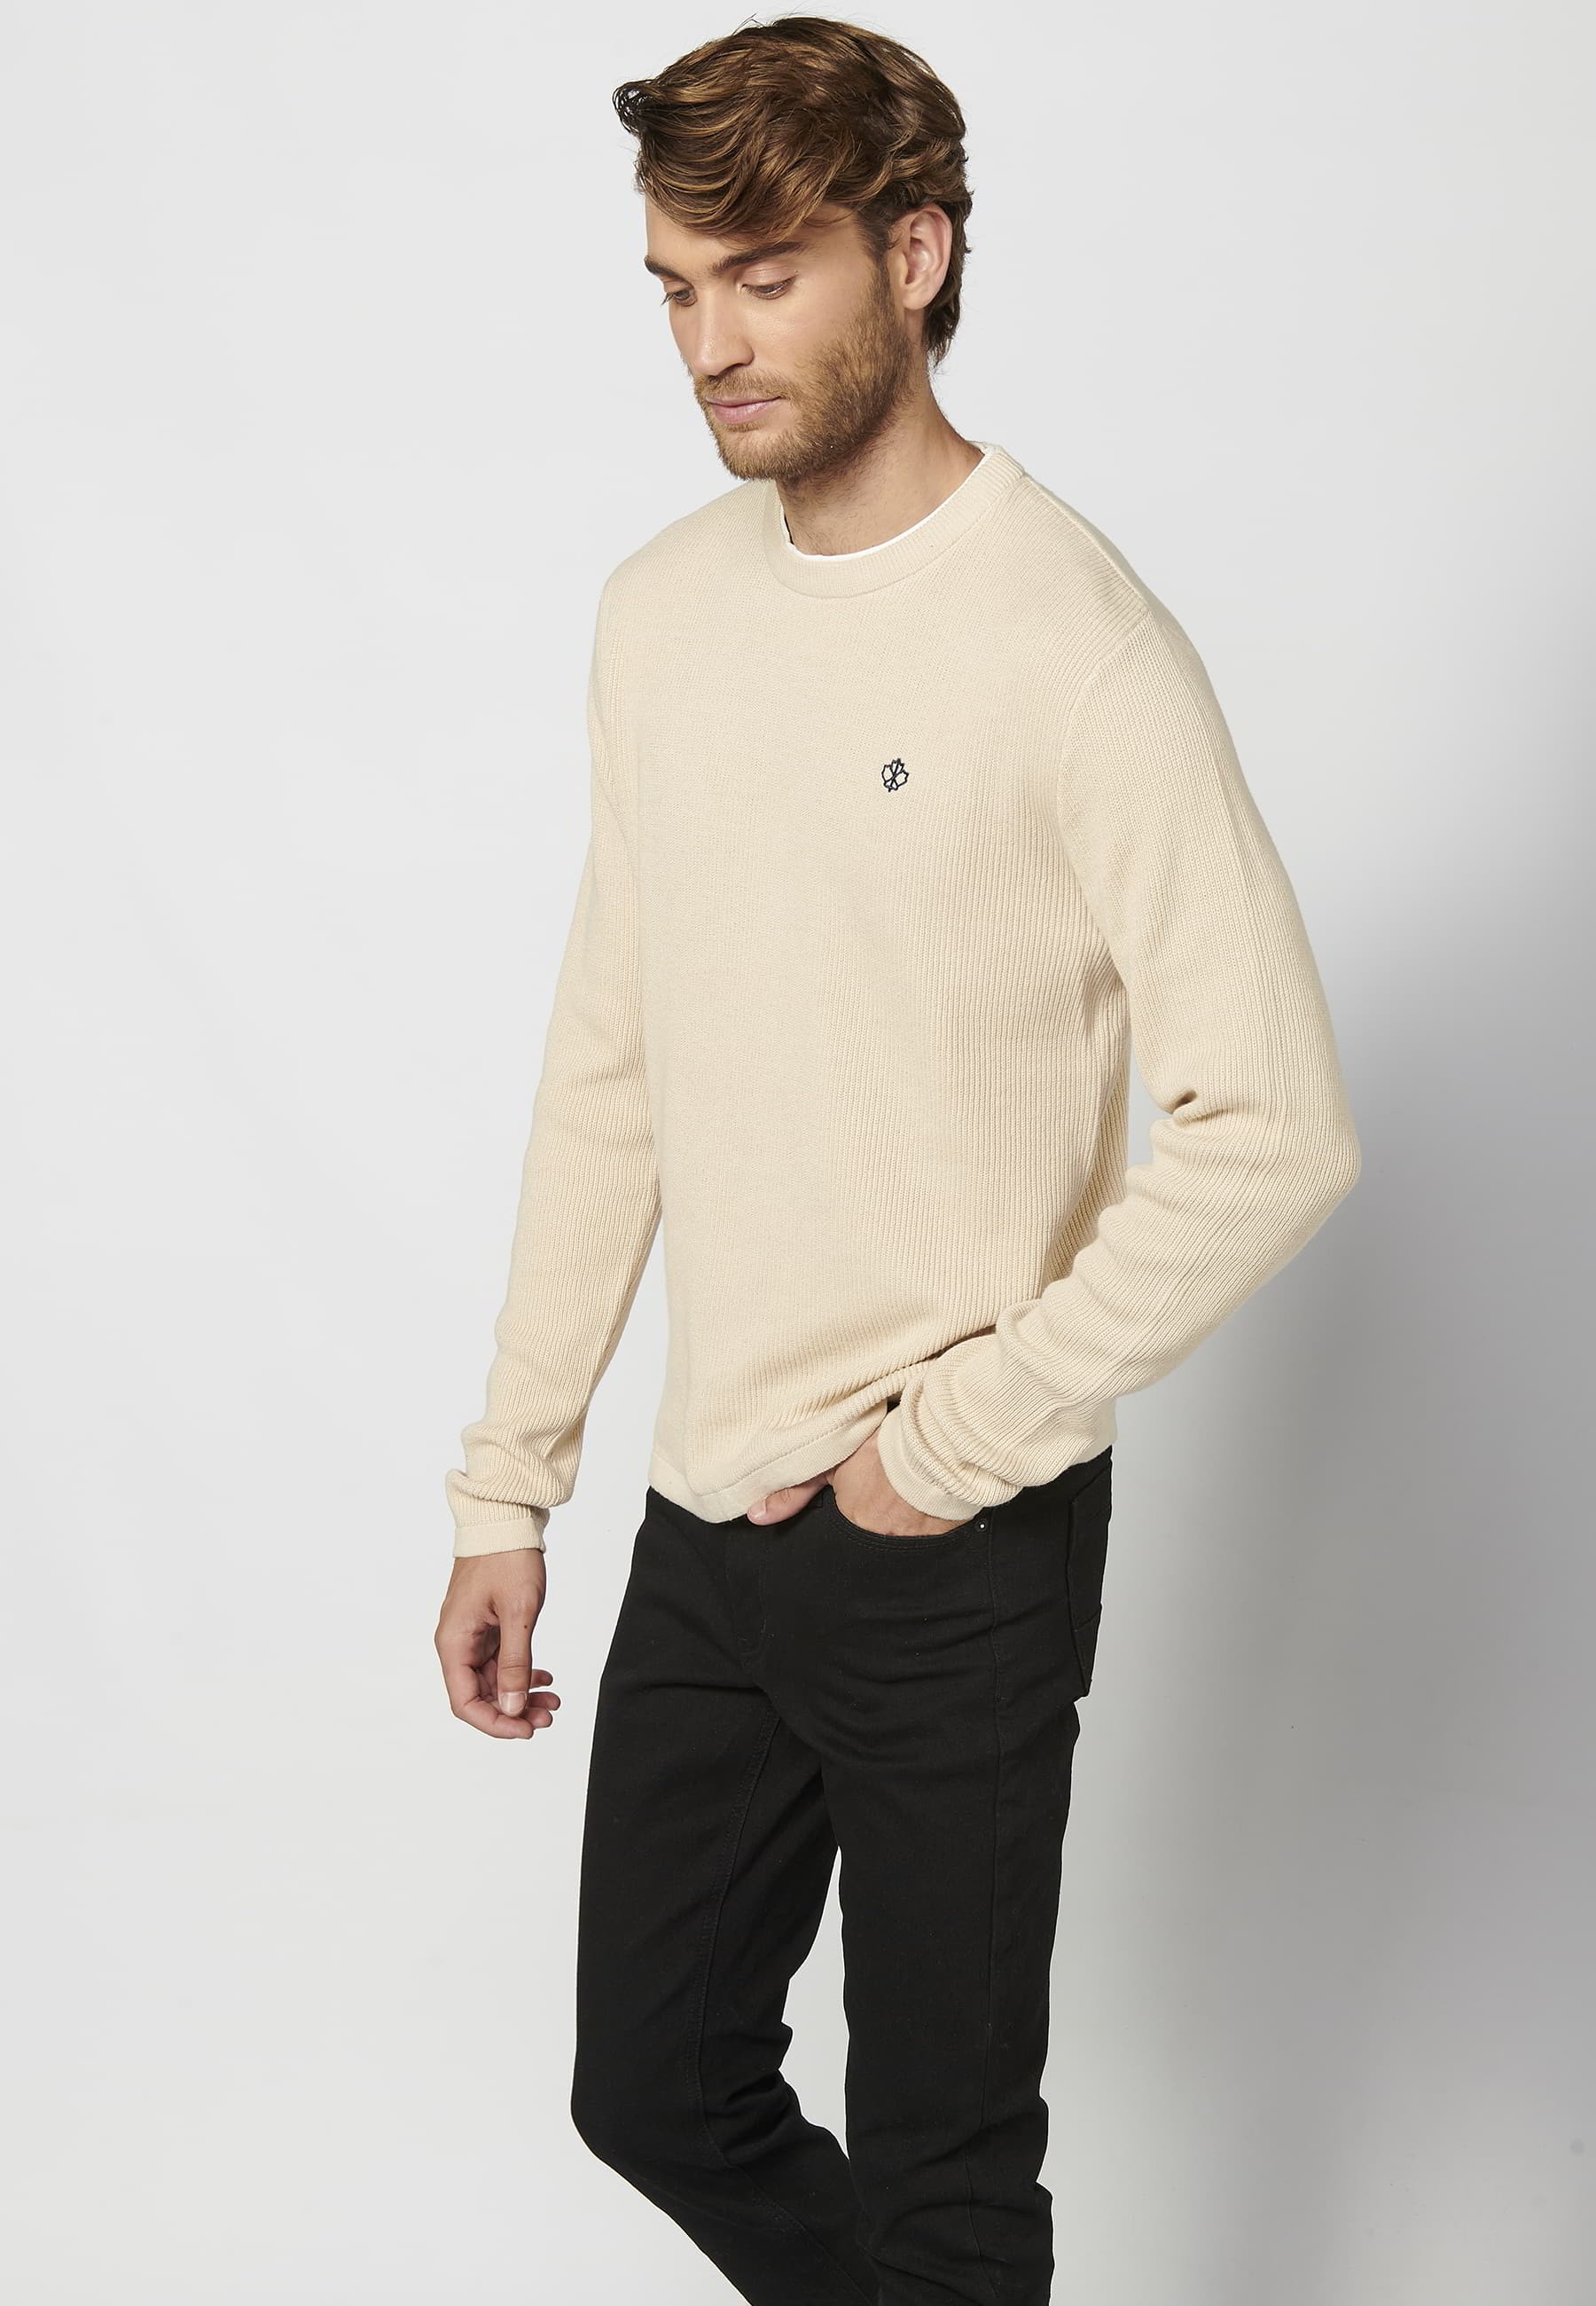 Long-sleeved cotton tricot sweater with embroidered detail in Cream color for Men